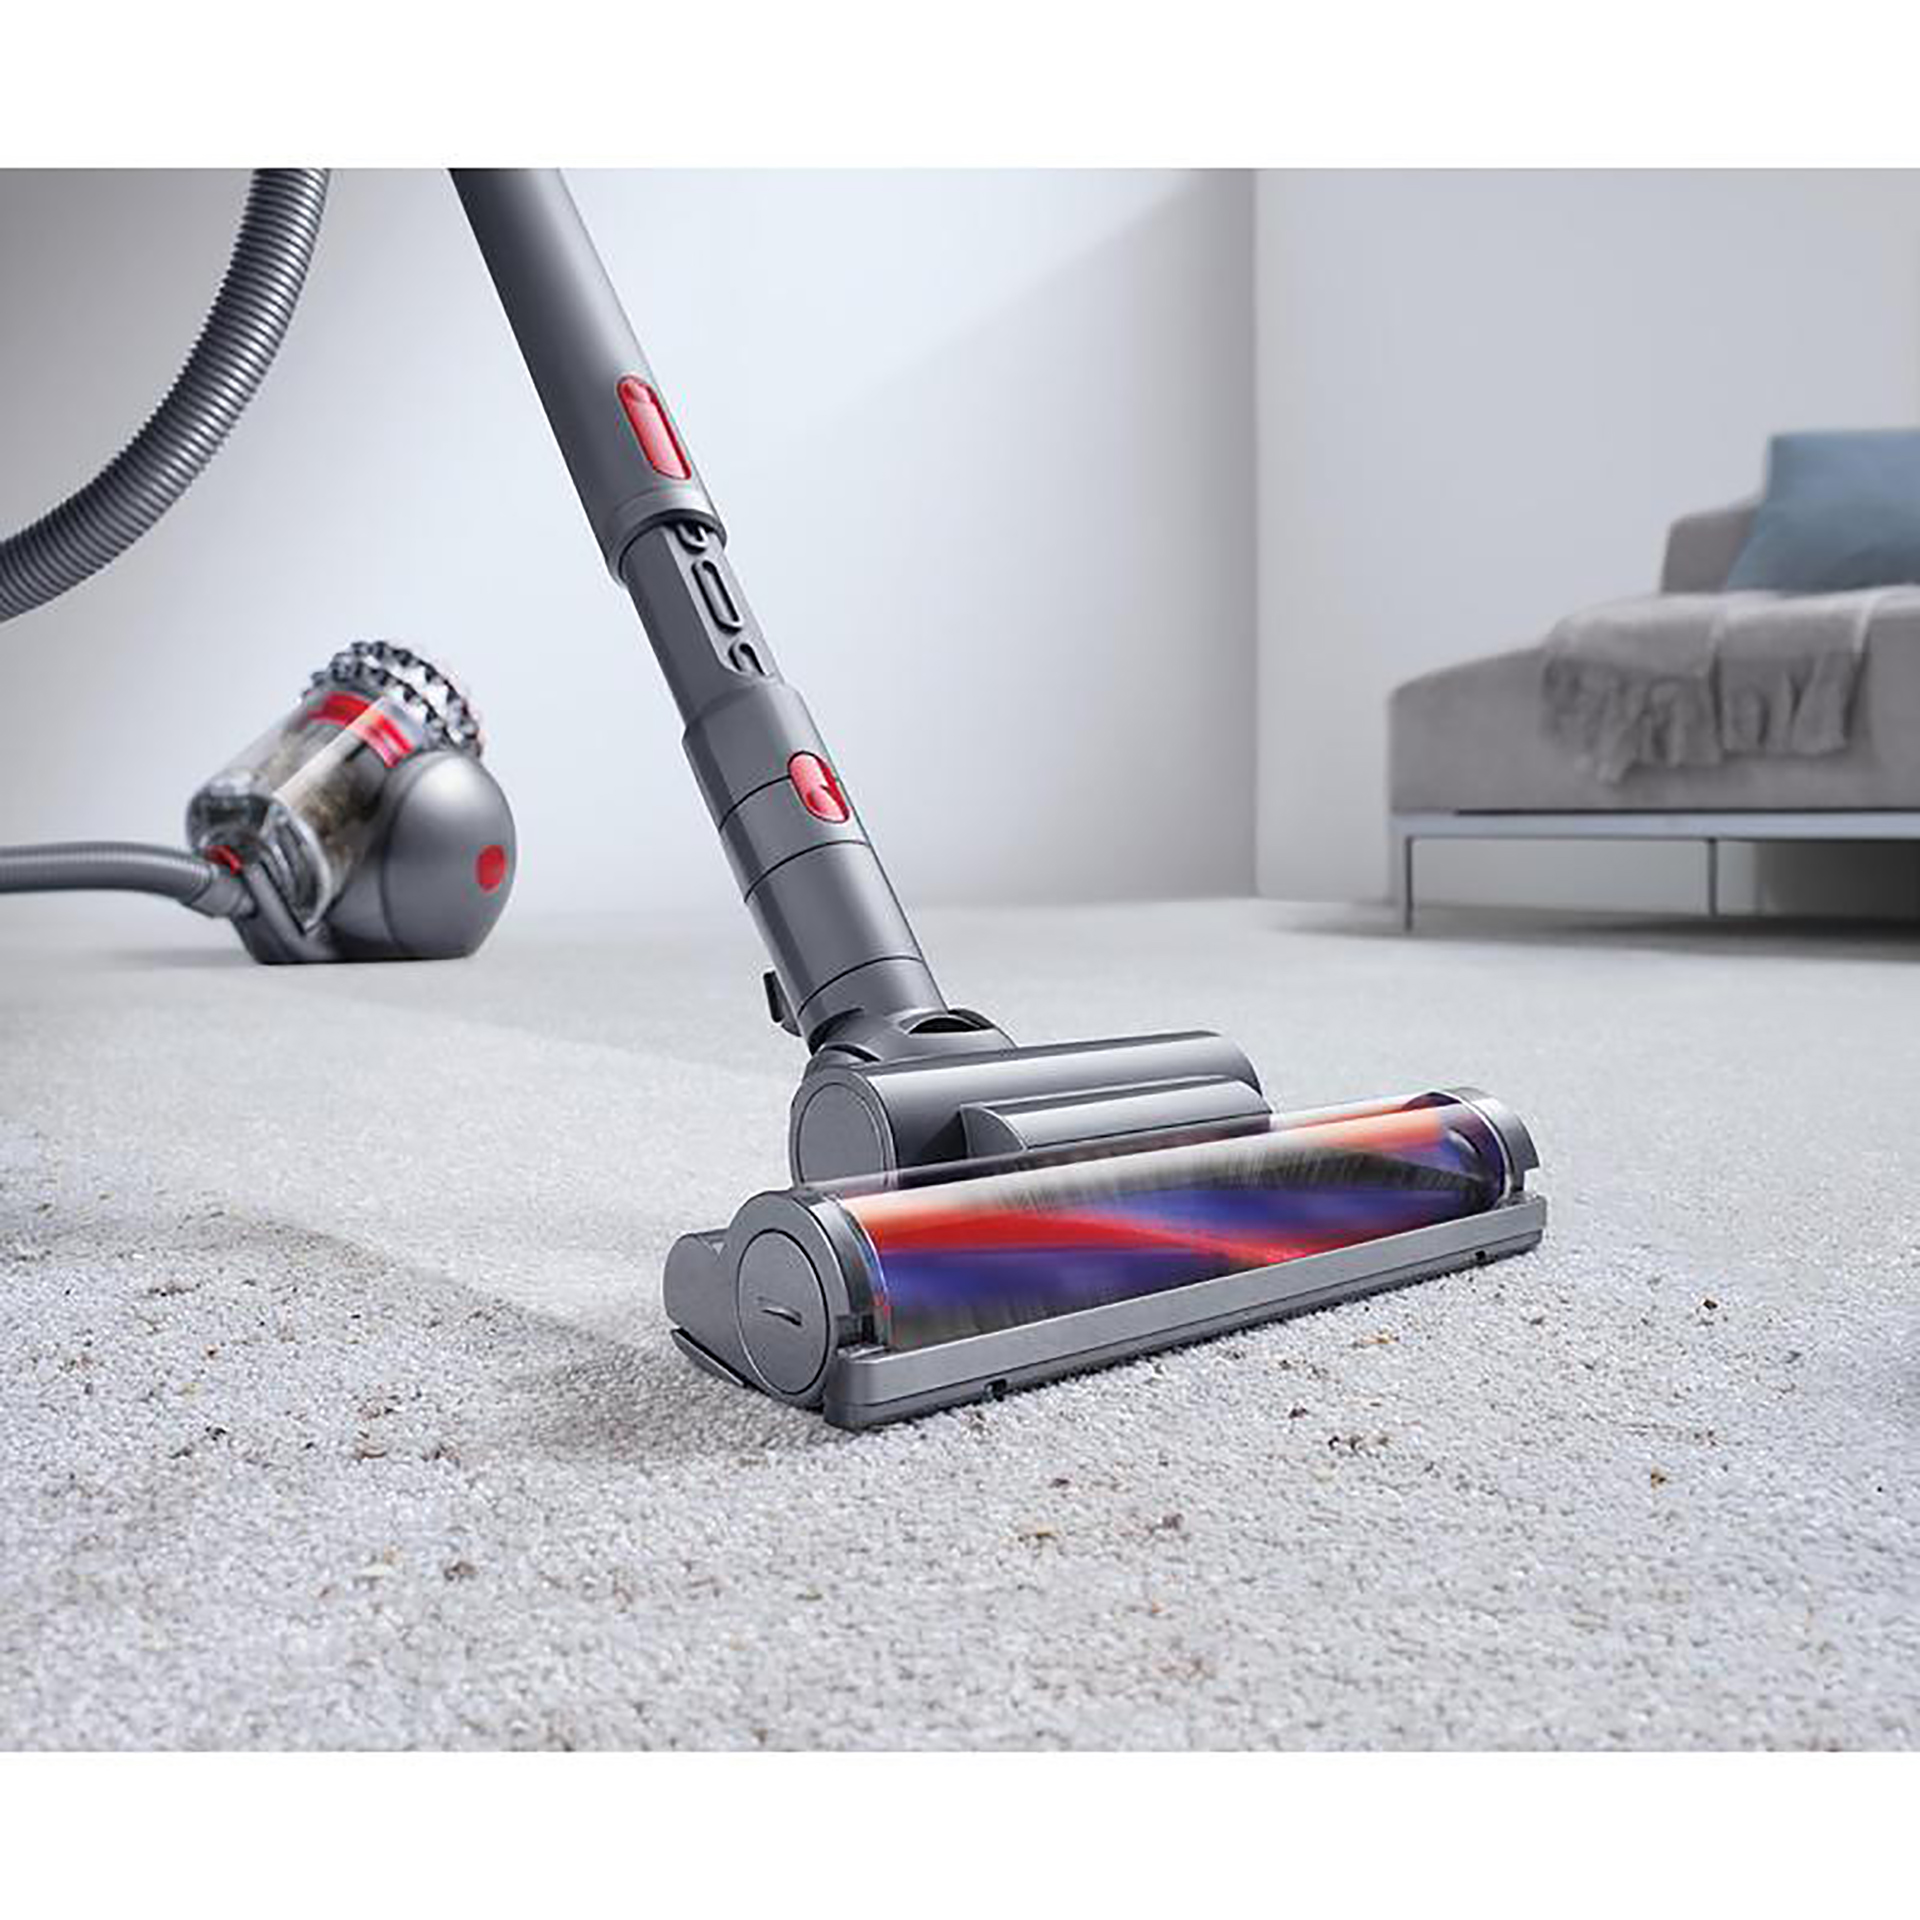 Dyson absolute 2. Dyson Cinetic big Ball absolute 2. Dyson Vacuum Cleaners. Sv22 Dyson Vacuum пылесос. Dyson big Ball Vacuum Cleaner.